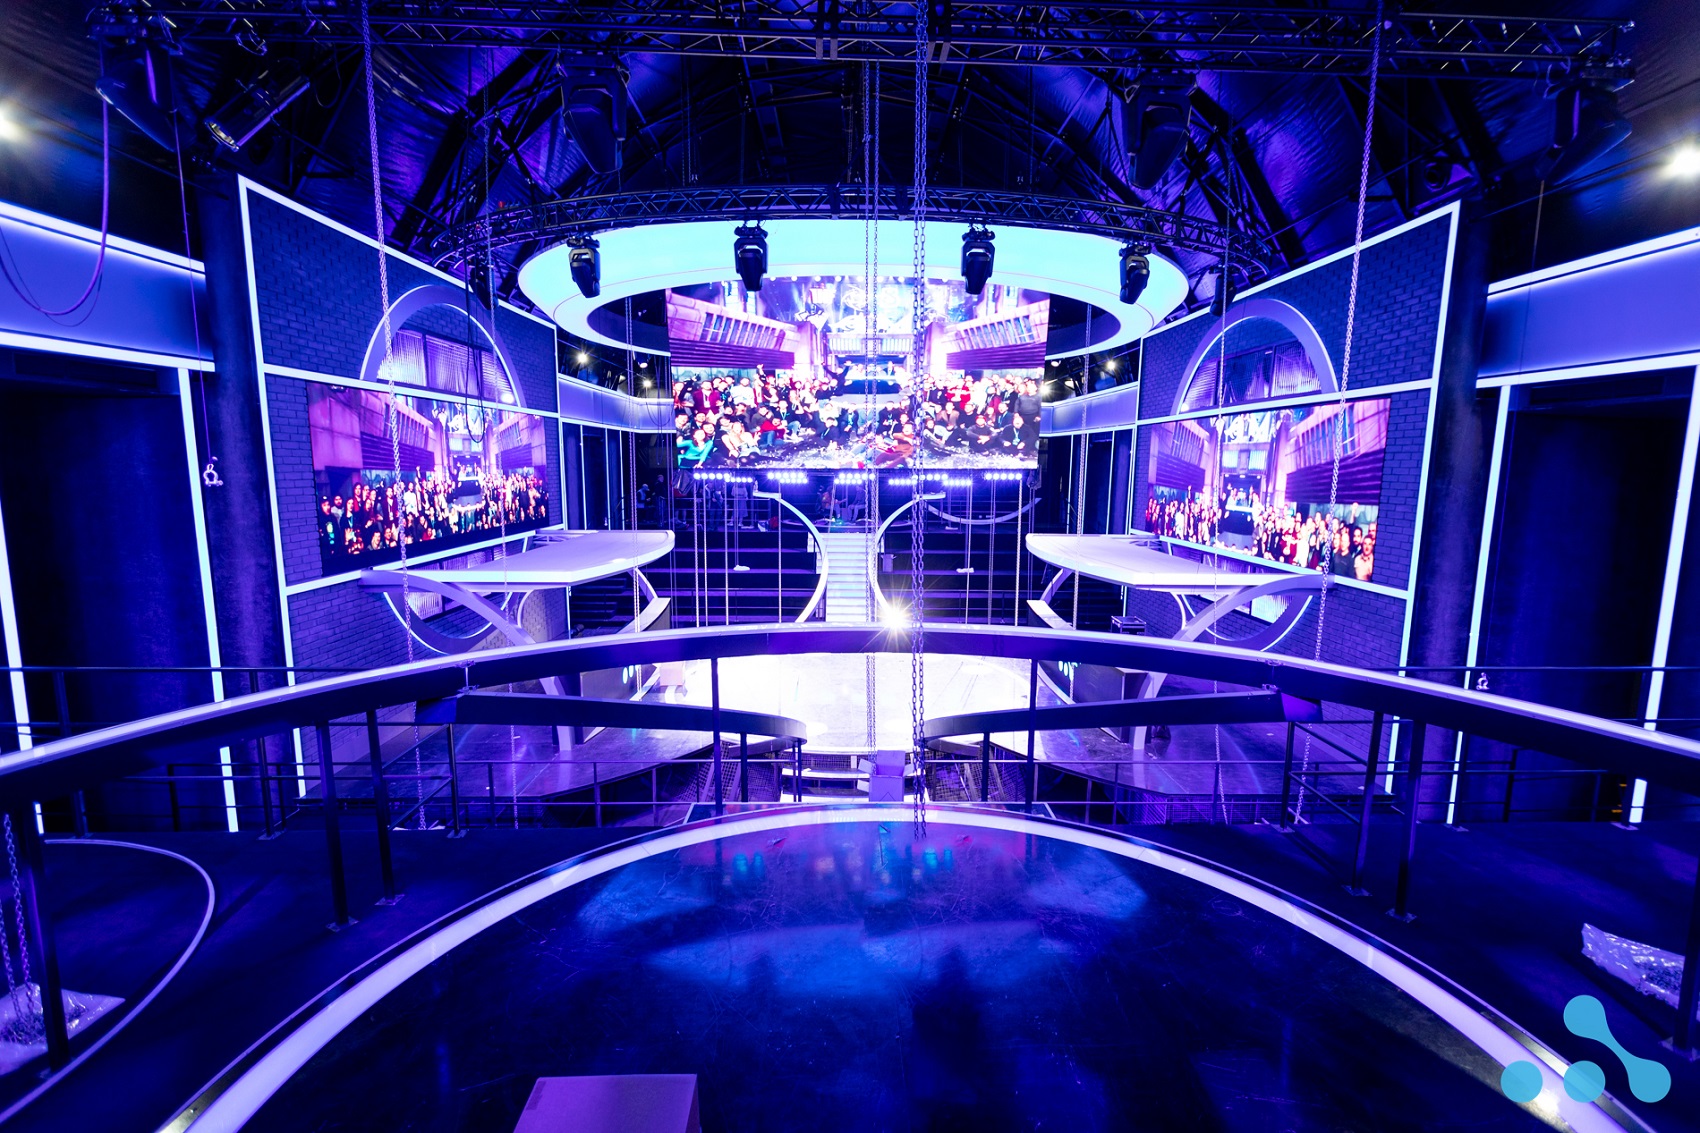 WePlay Esports Arena was meant to be hosting WePlay Academy League Season 3 Finals